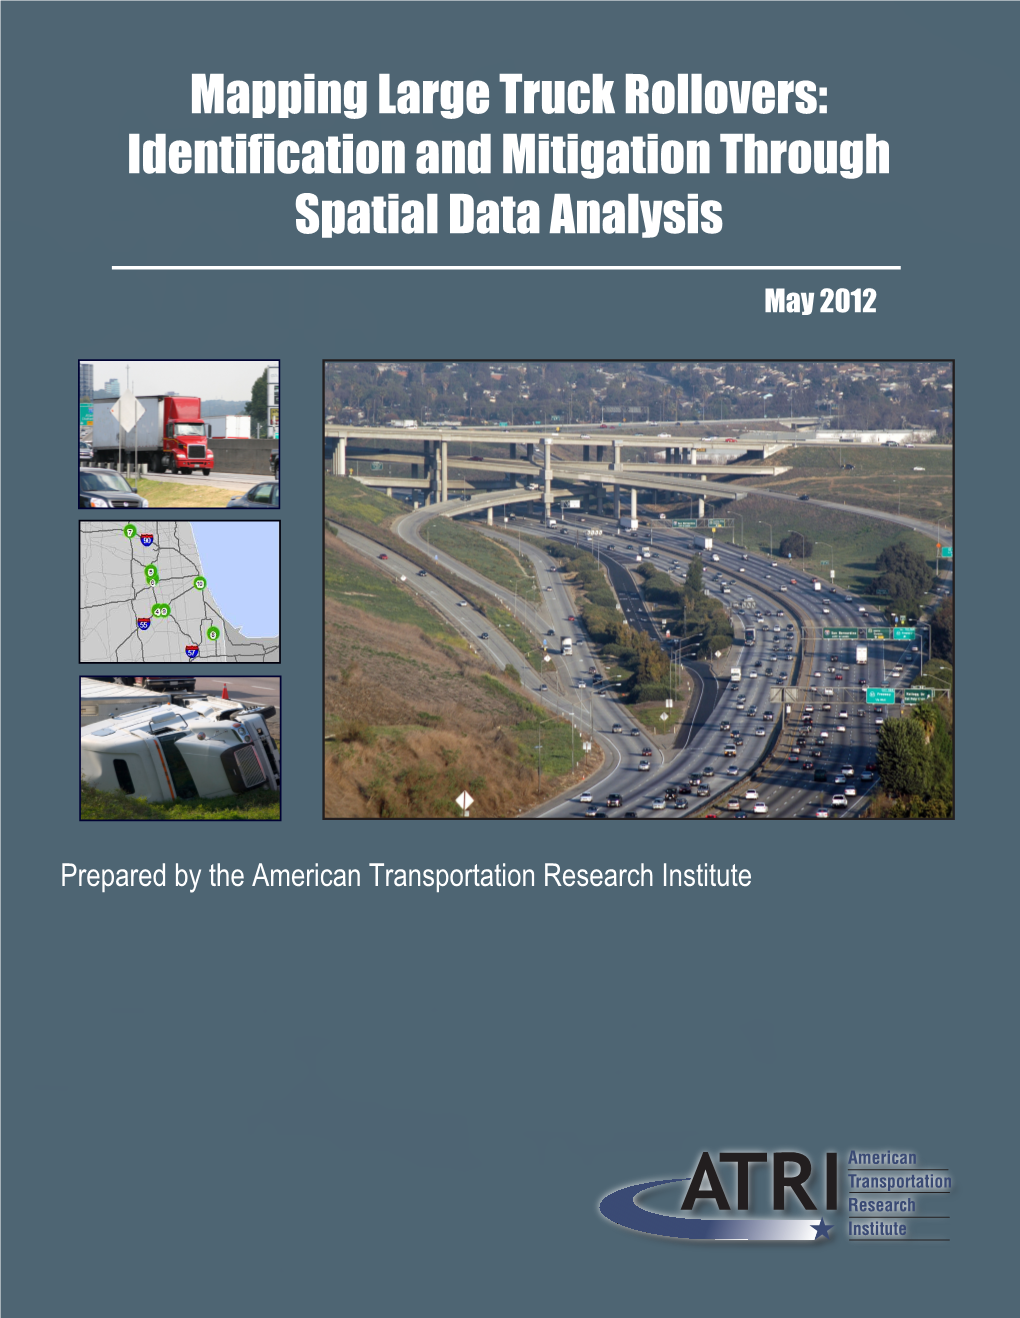 Mapping Large Truck Rollovers: Identification and Mitigation Through Spatial Data Analysis